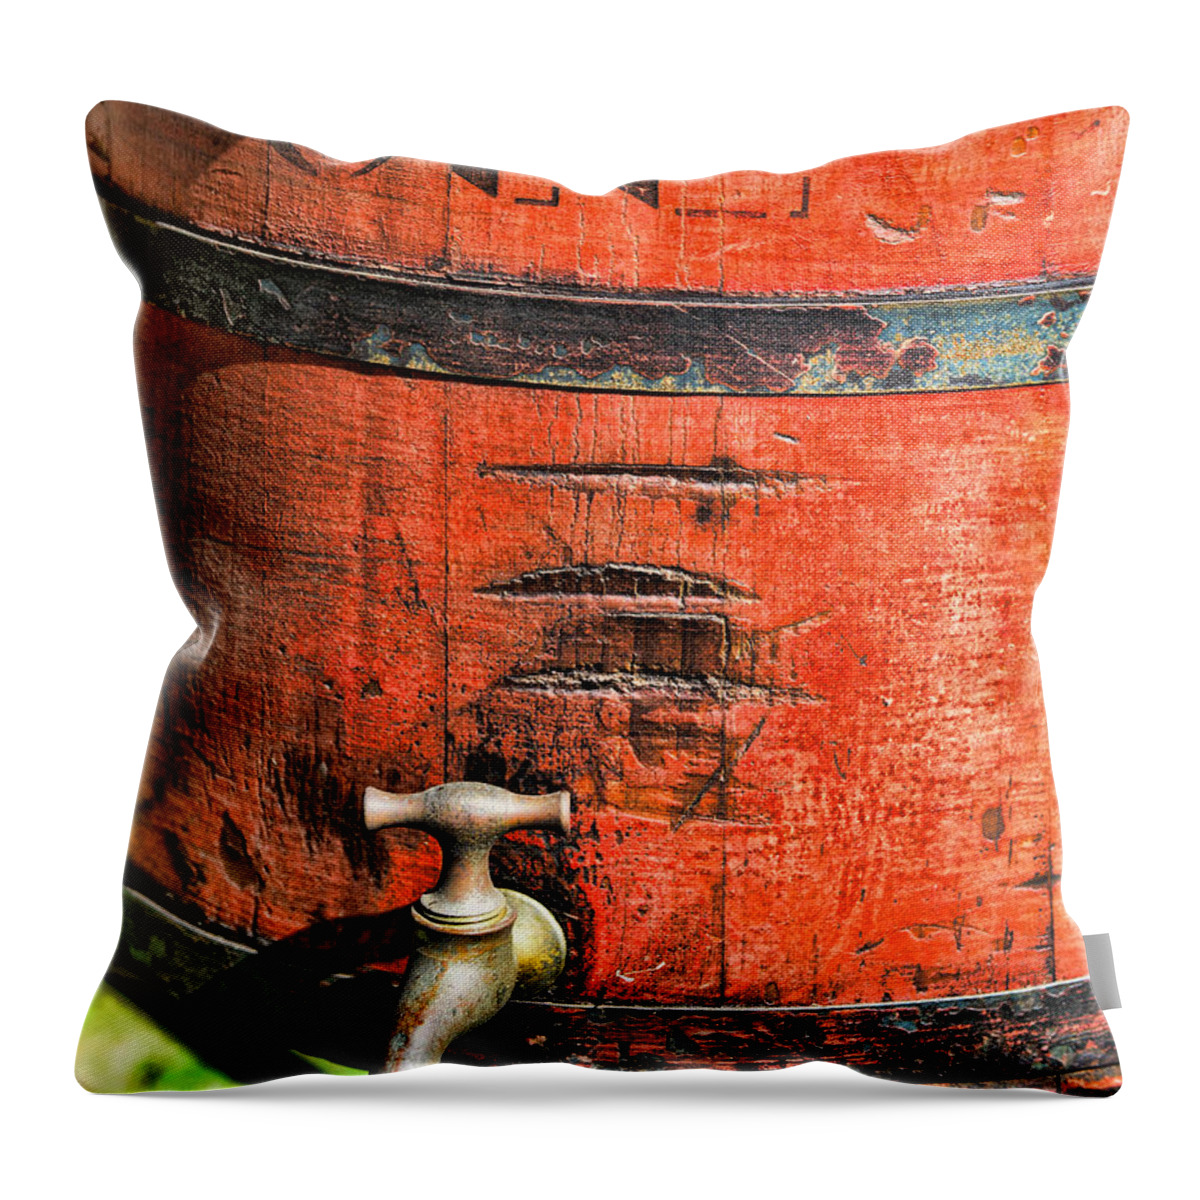 Weathered Red Oil Bucket Throw Pillow featuring the photograph Weathered Red Oil Bucket by Paul Ward